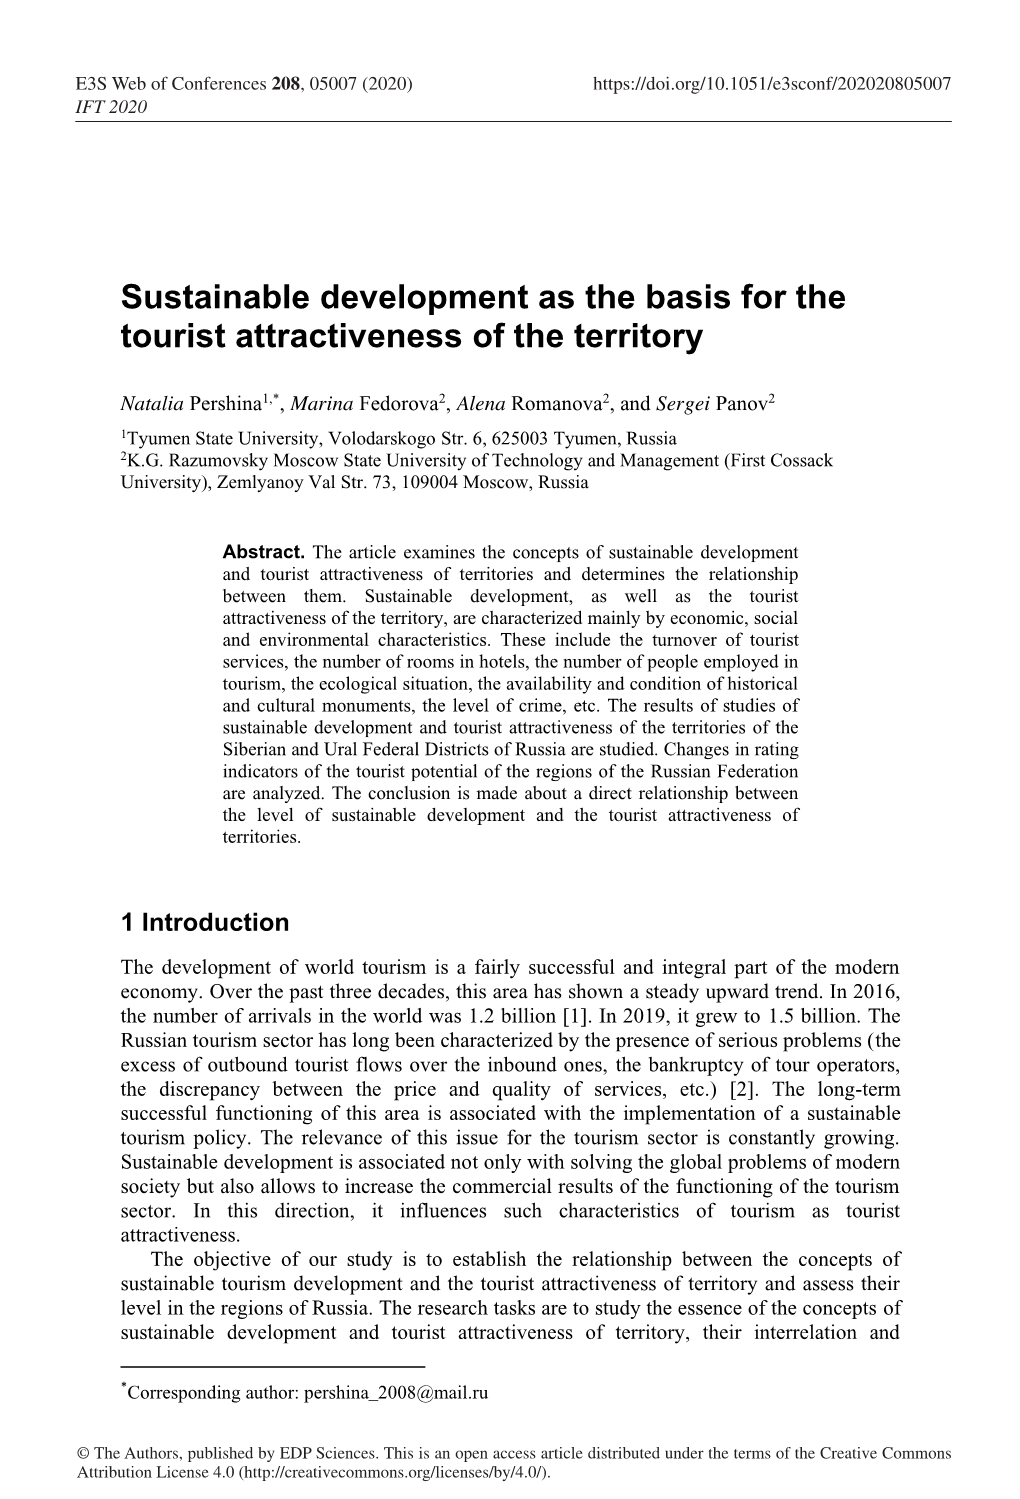 Sustainable Development As the Basis for the Tourist Attractiveness of the Territory